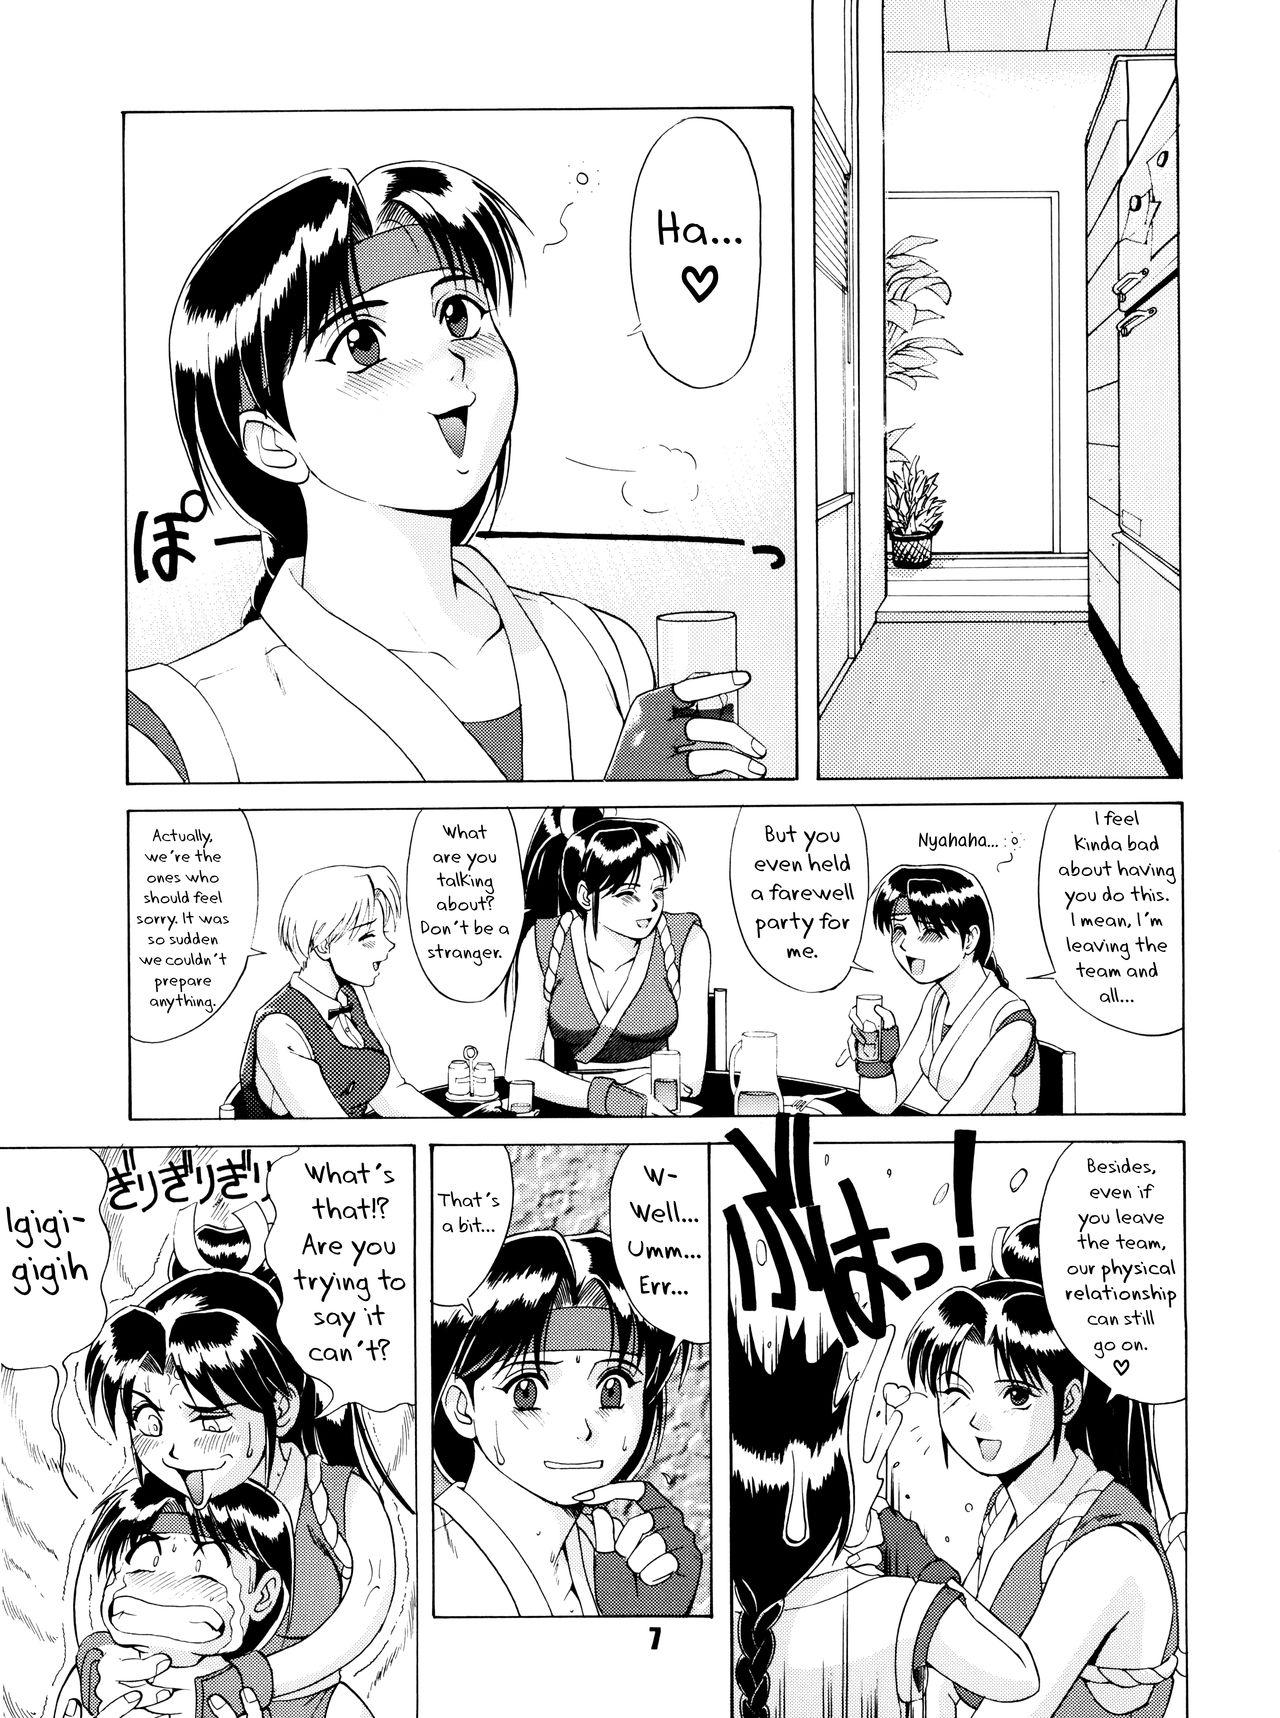 Amiga The Yuri & Friends '96 - King of fighters Hot Milf - Page 6